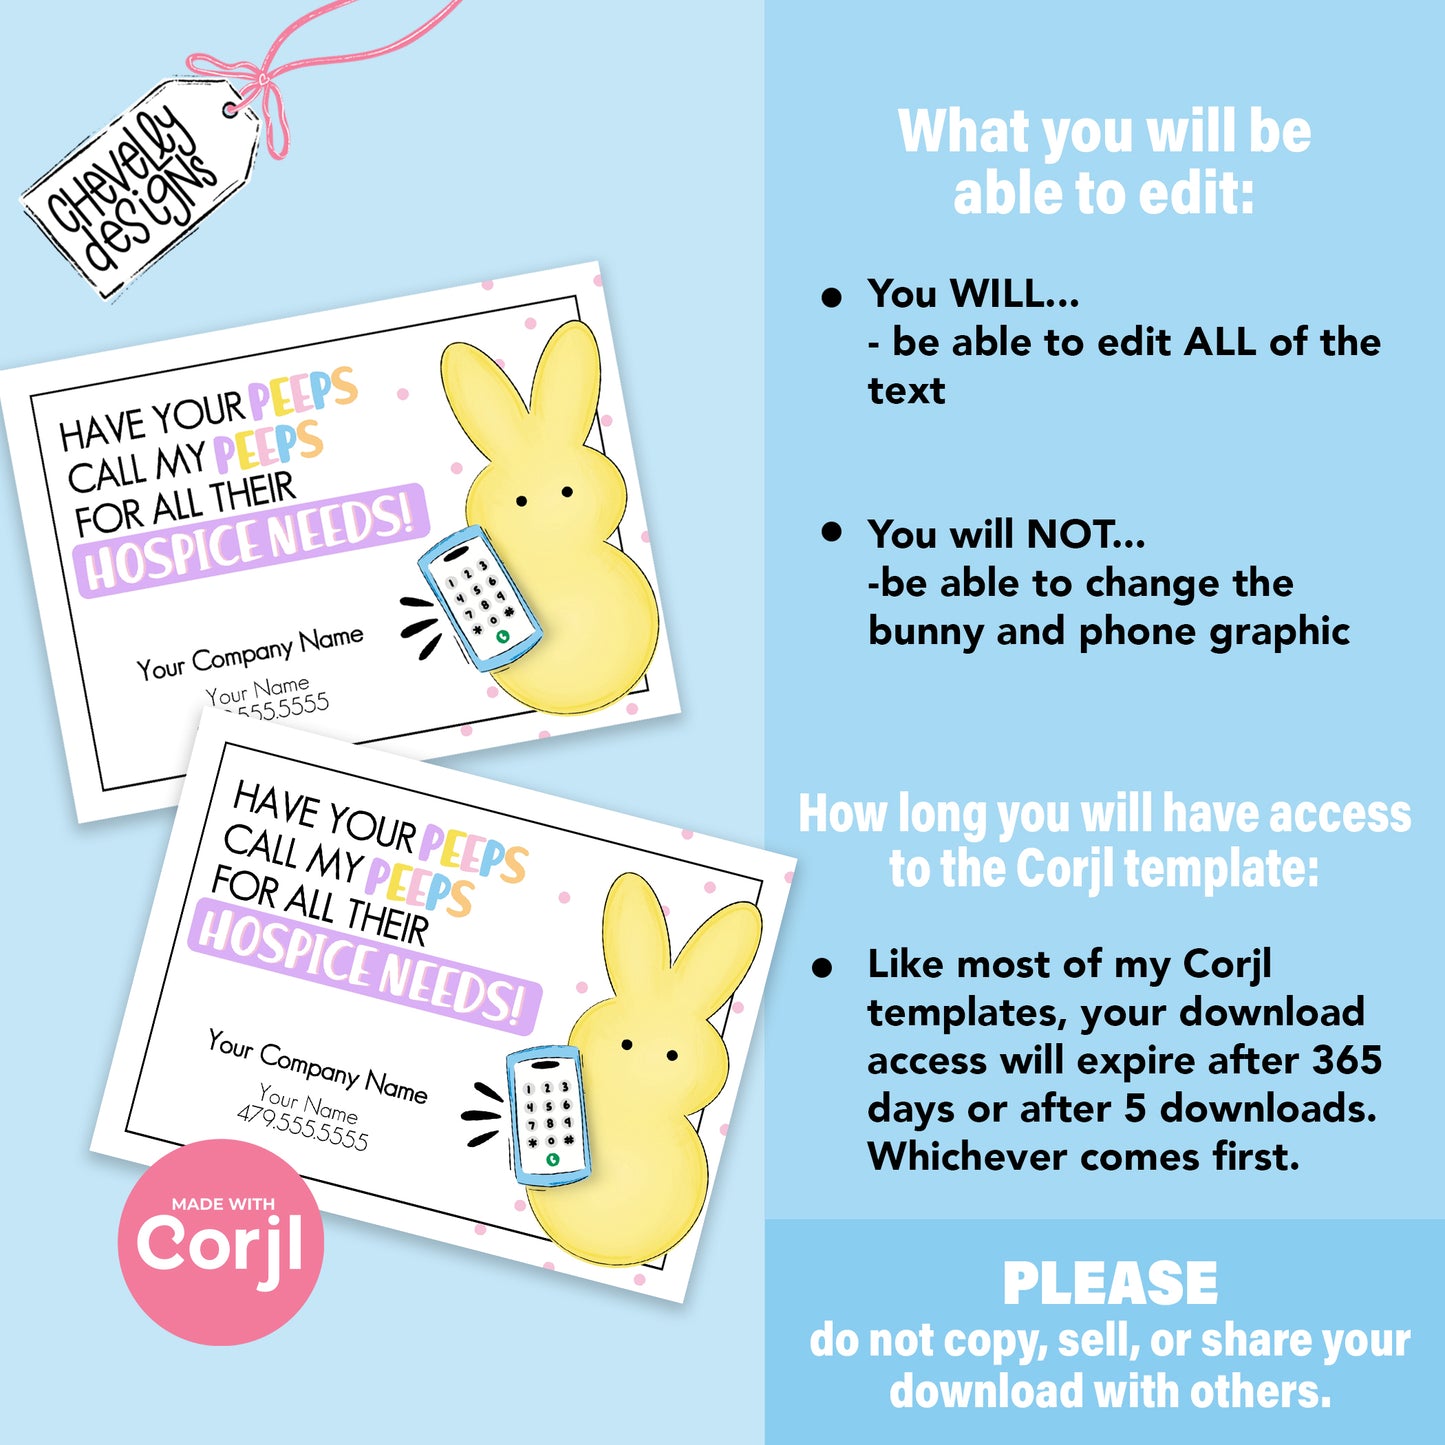 EDITABLE - Call my peeps for all your hospice needs - Easter Business Referral Marketing Gift Tag - Printable Digital File